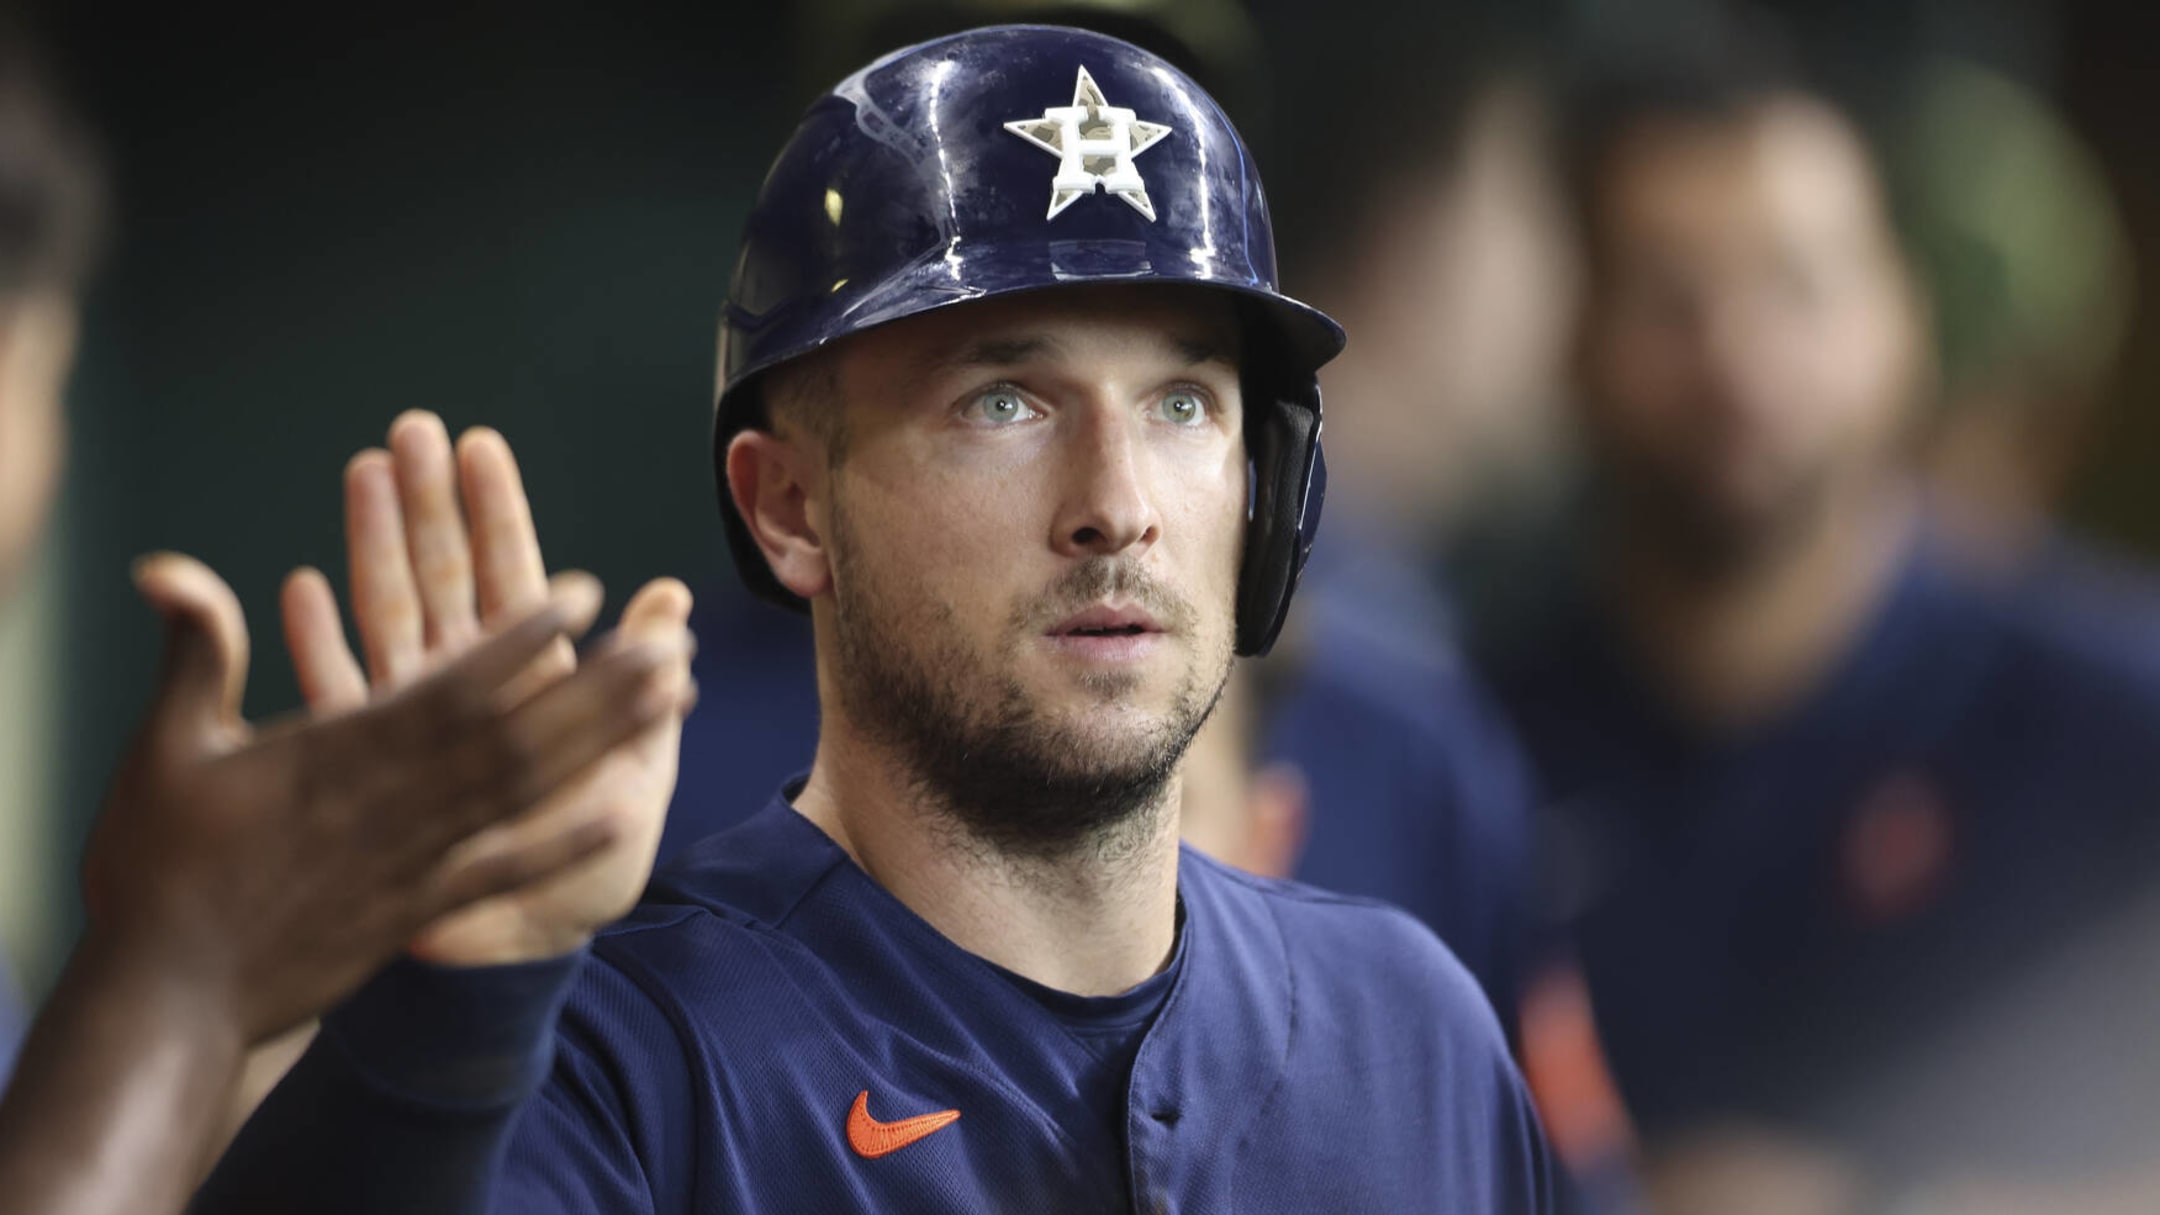 Alex Bregman Tweets Photo in Soccer Jersey, Supports USMNT in